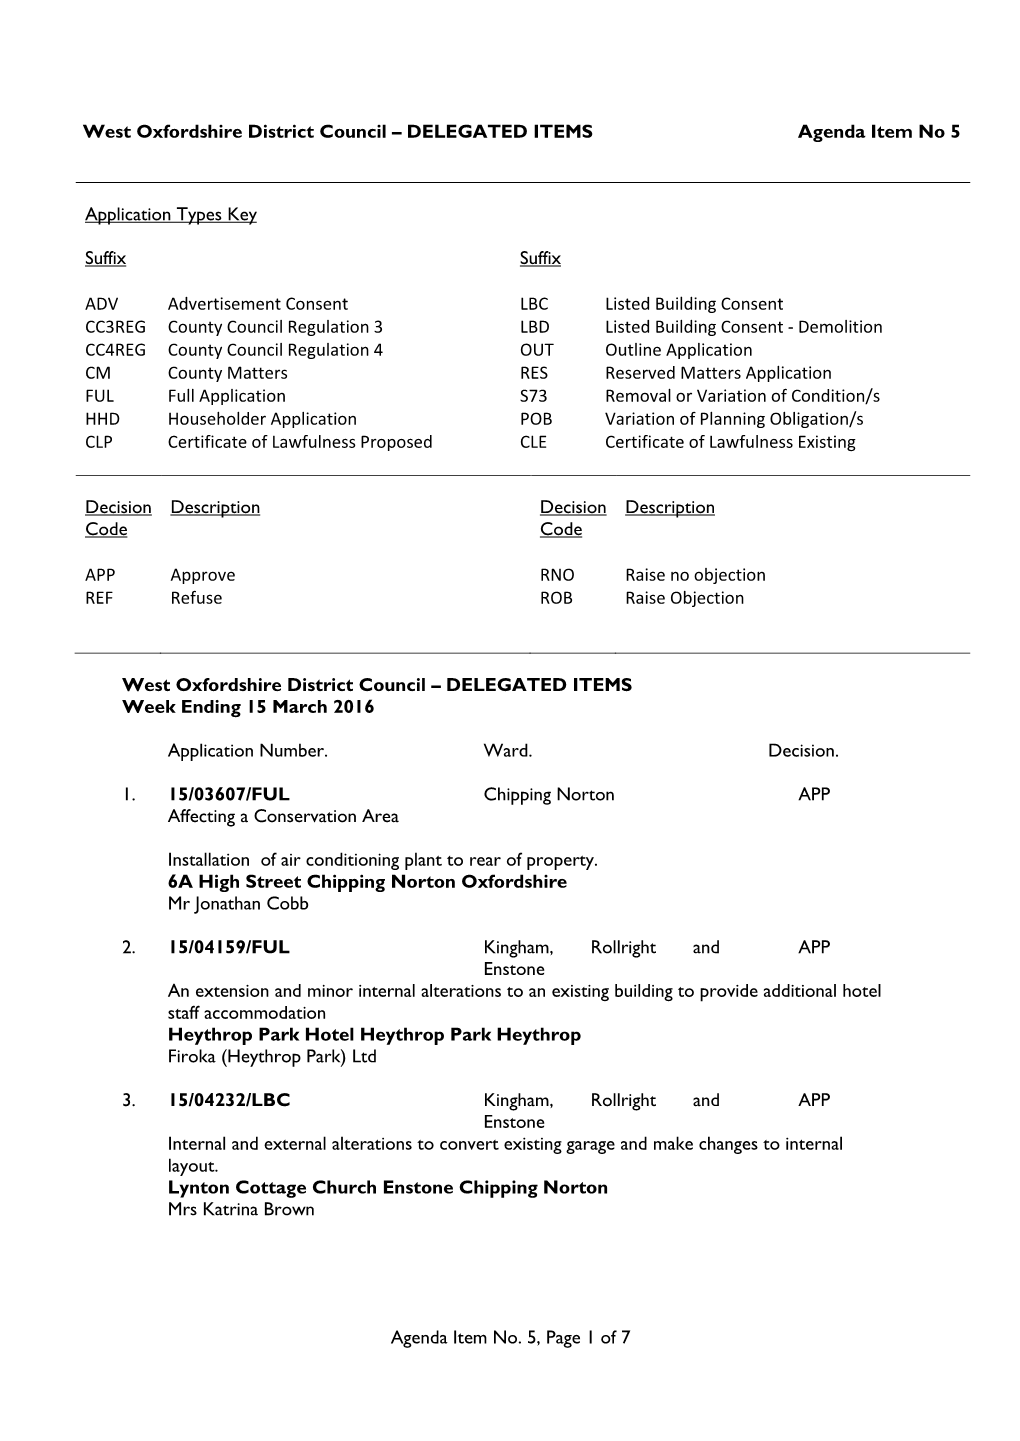 Initial Document Template